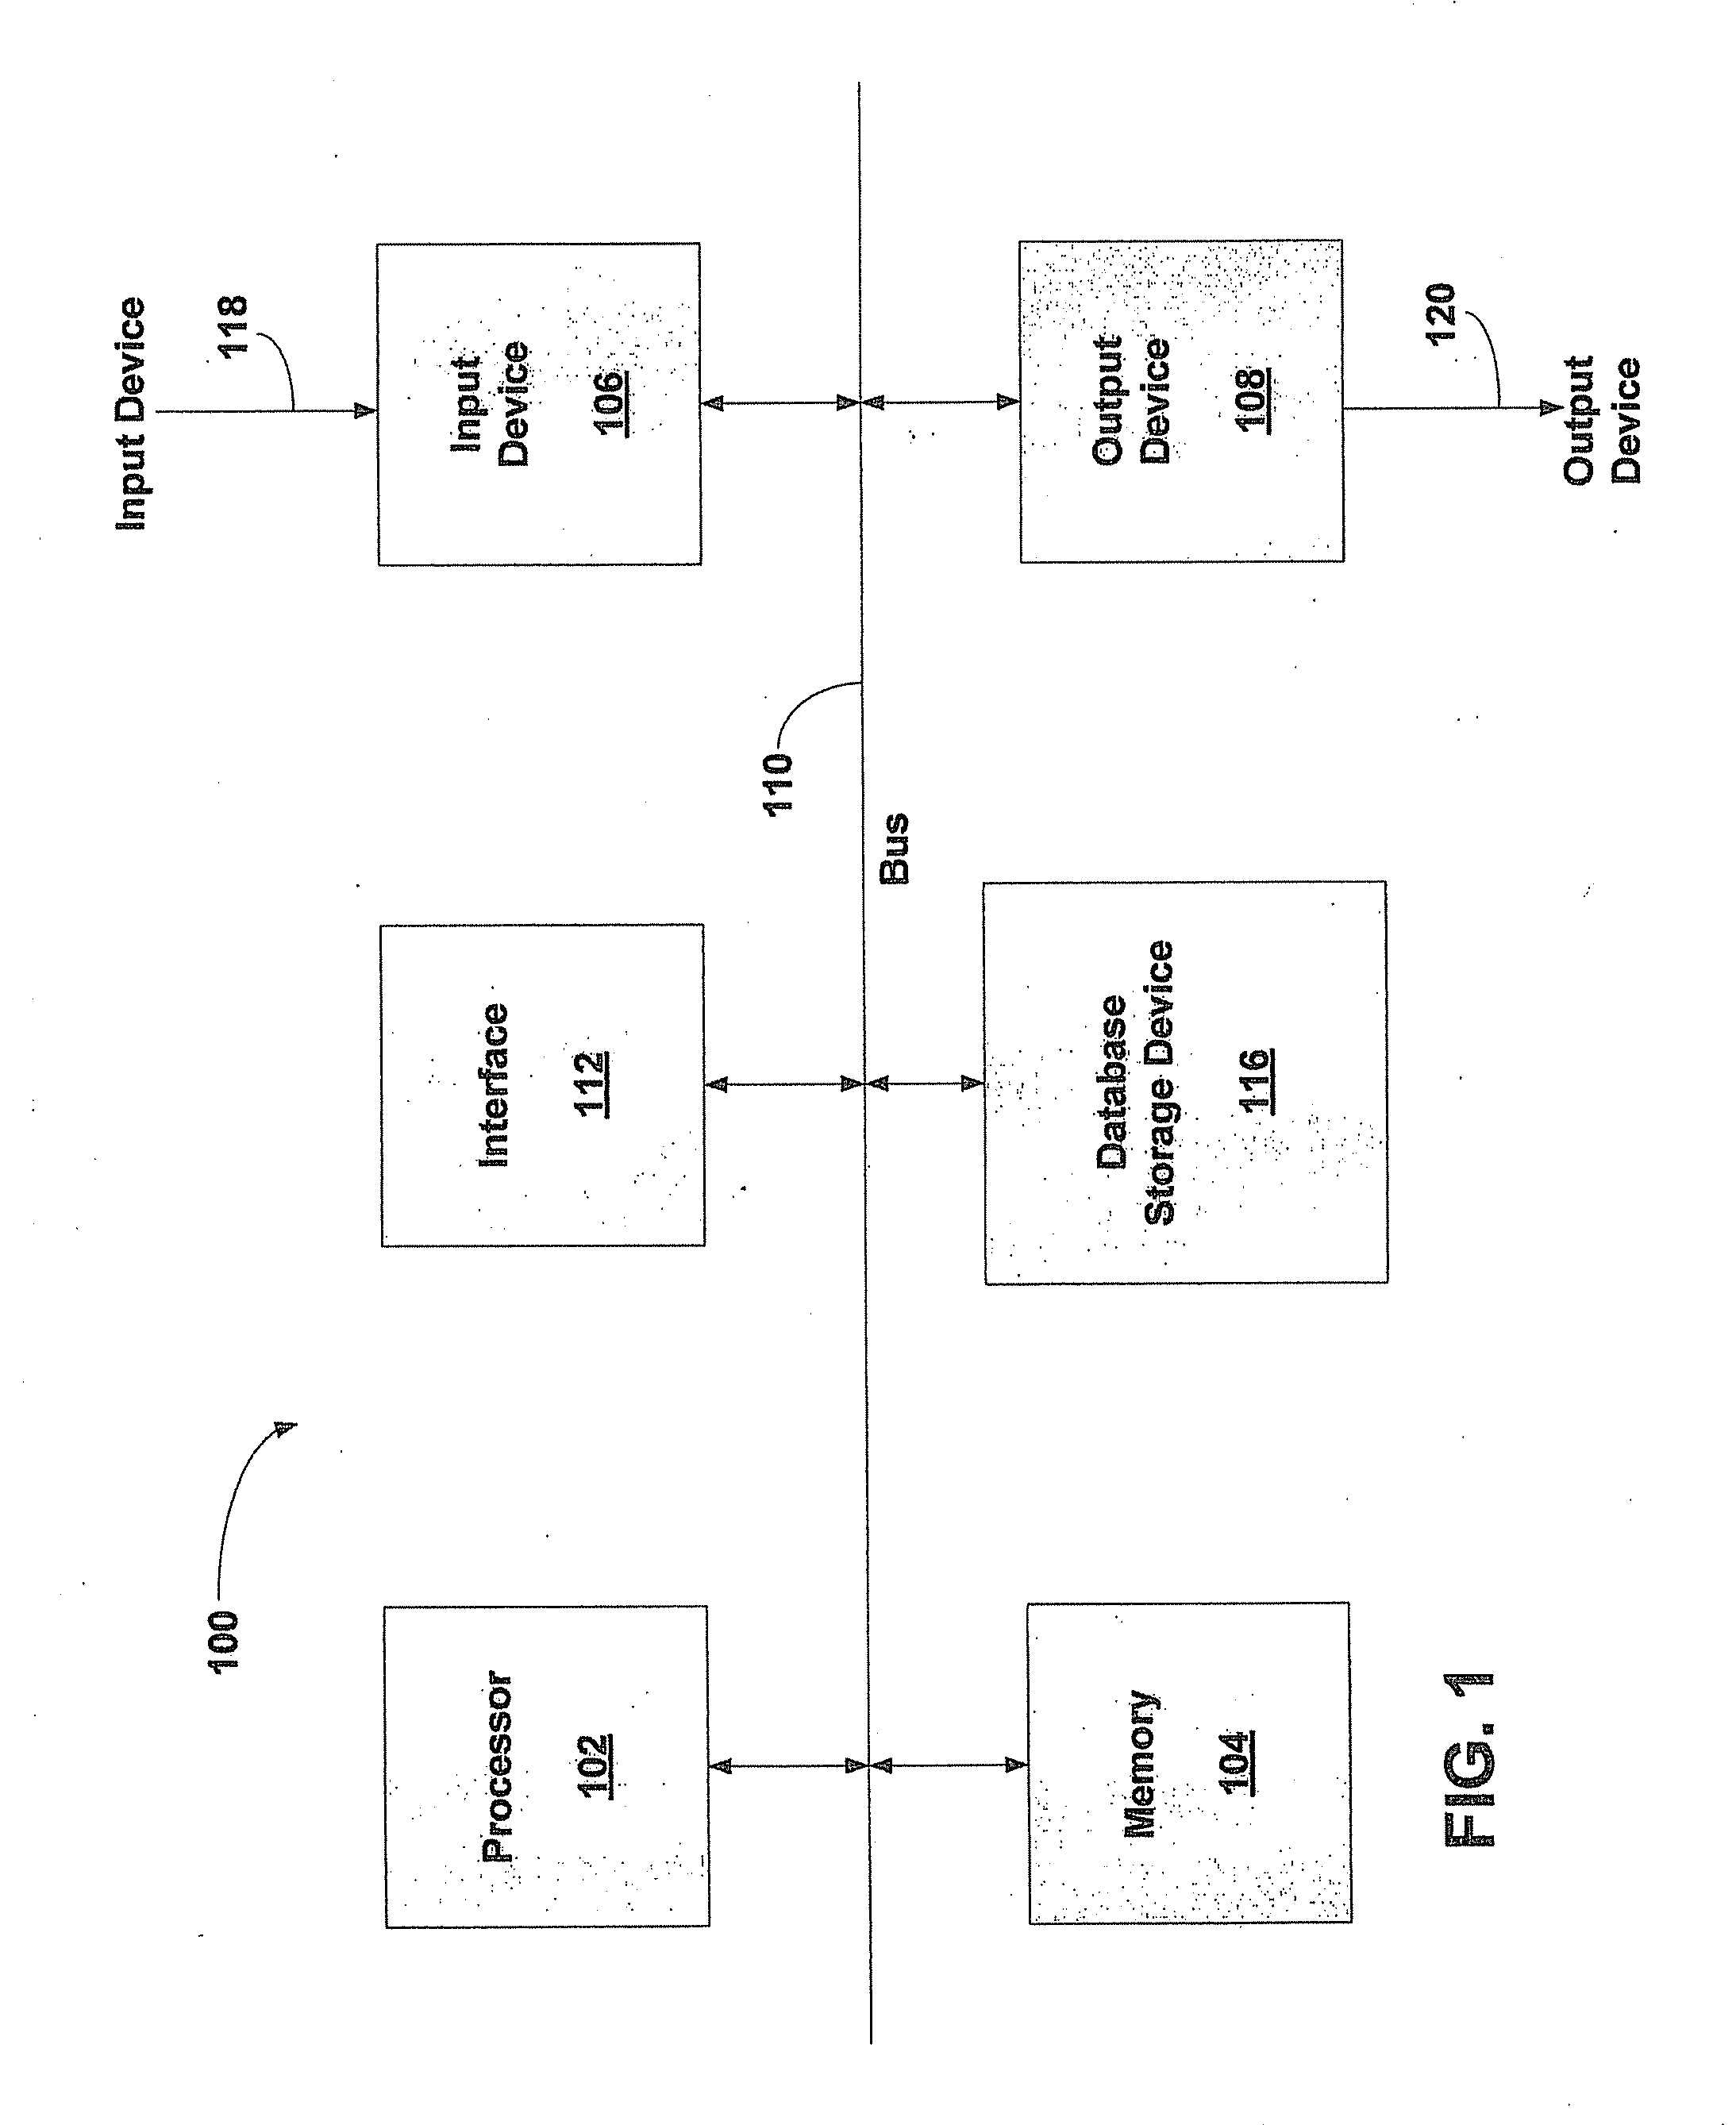 System and process for virtually decorating a room or area